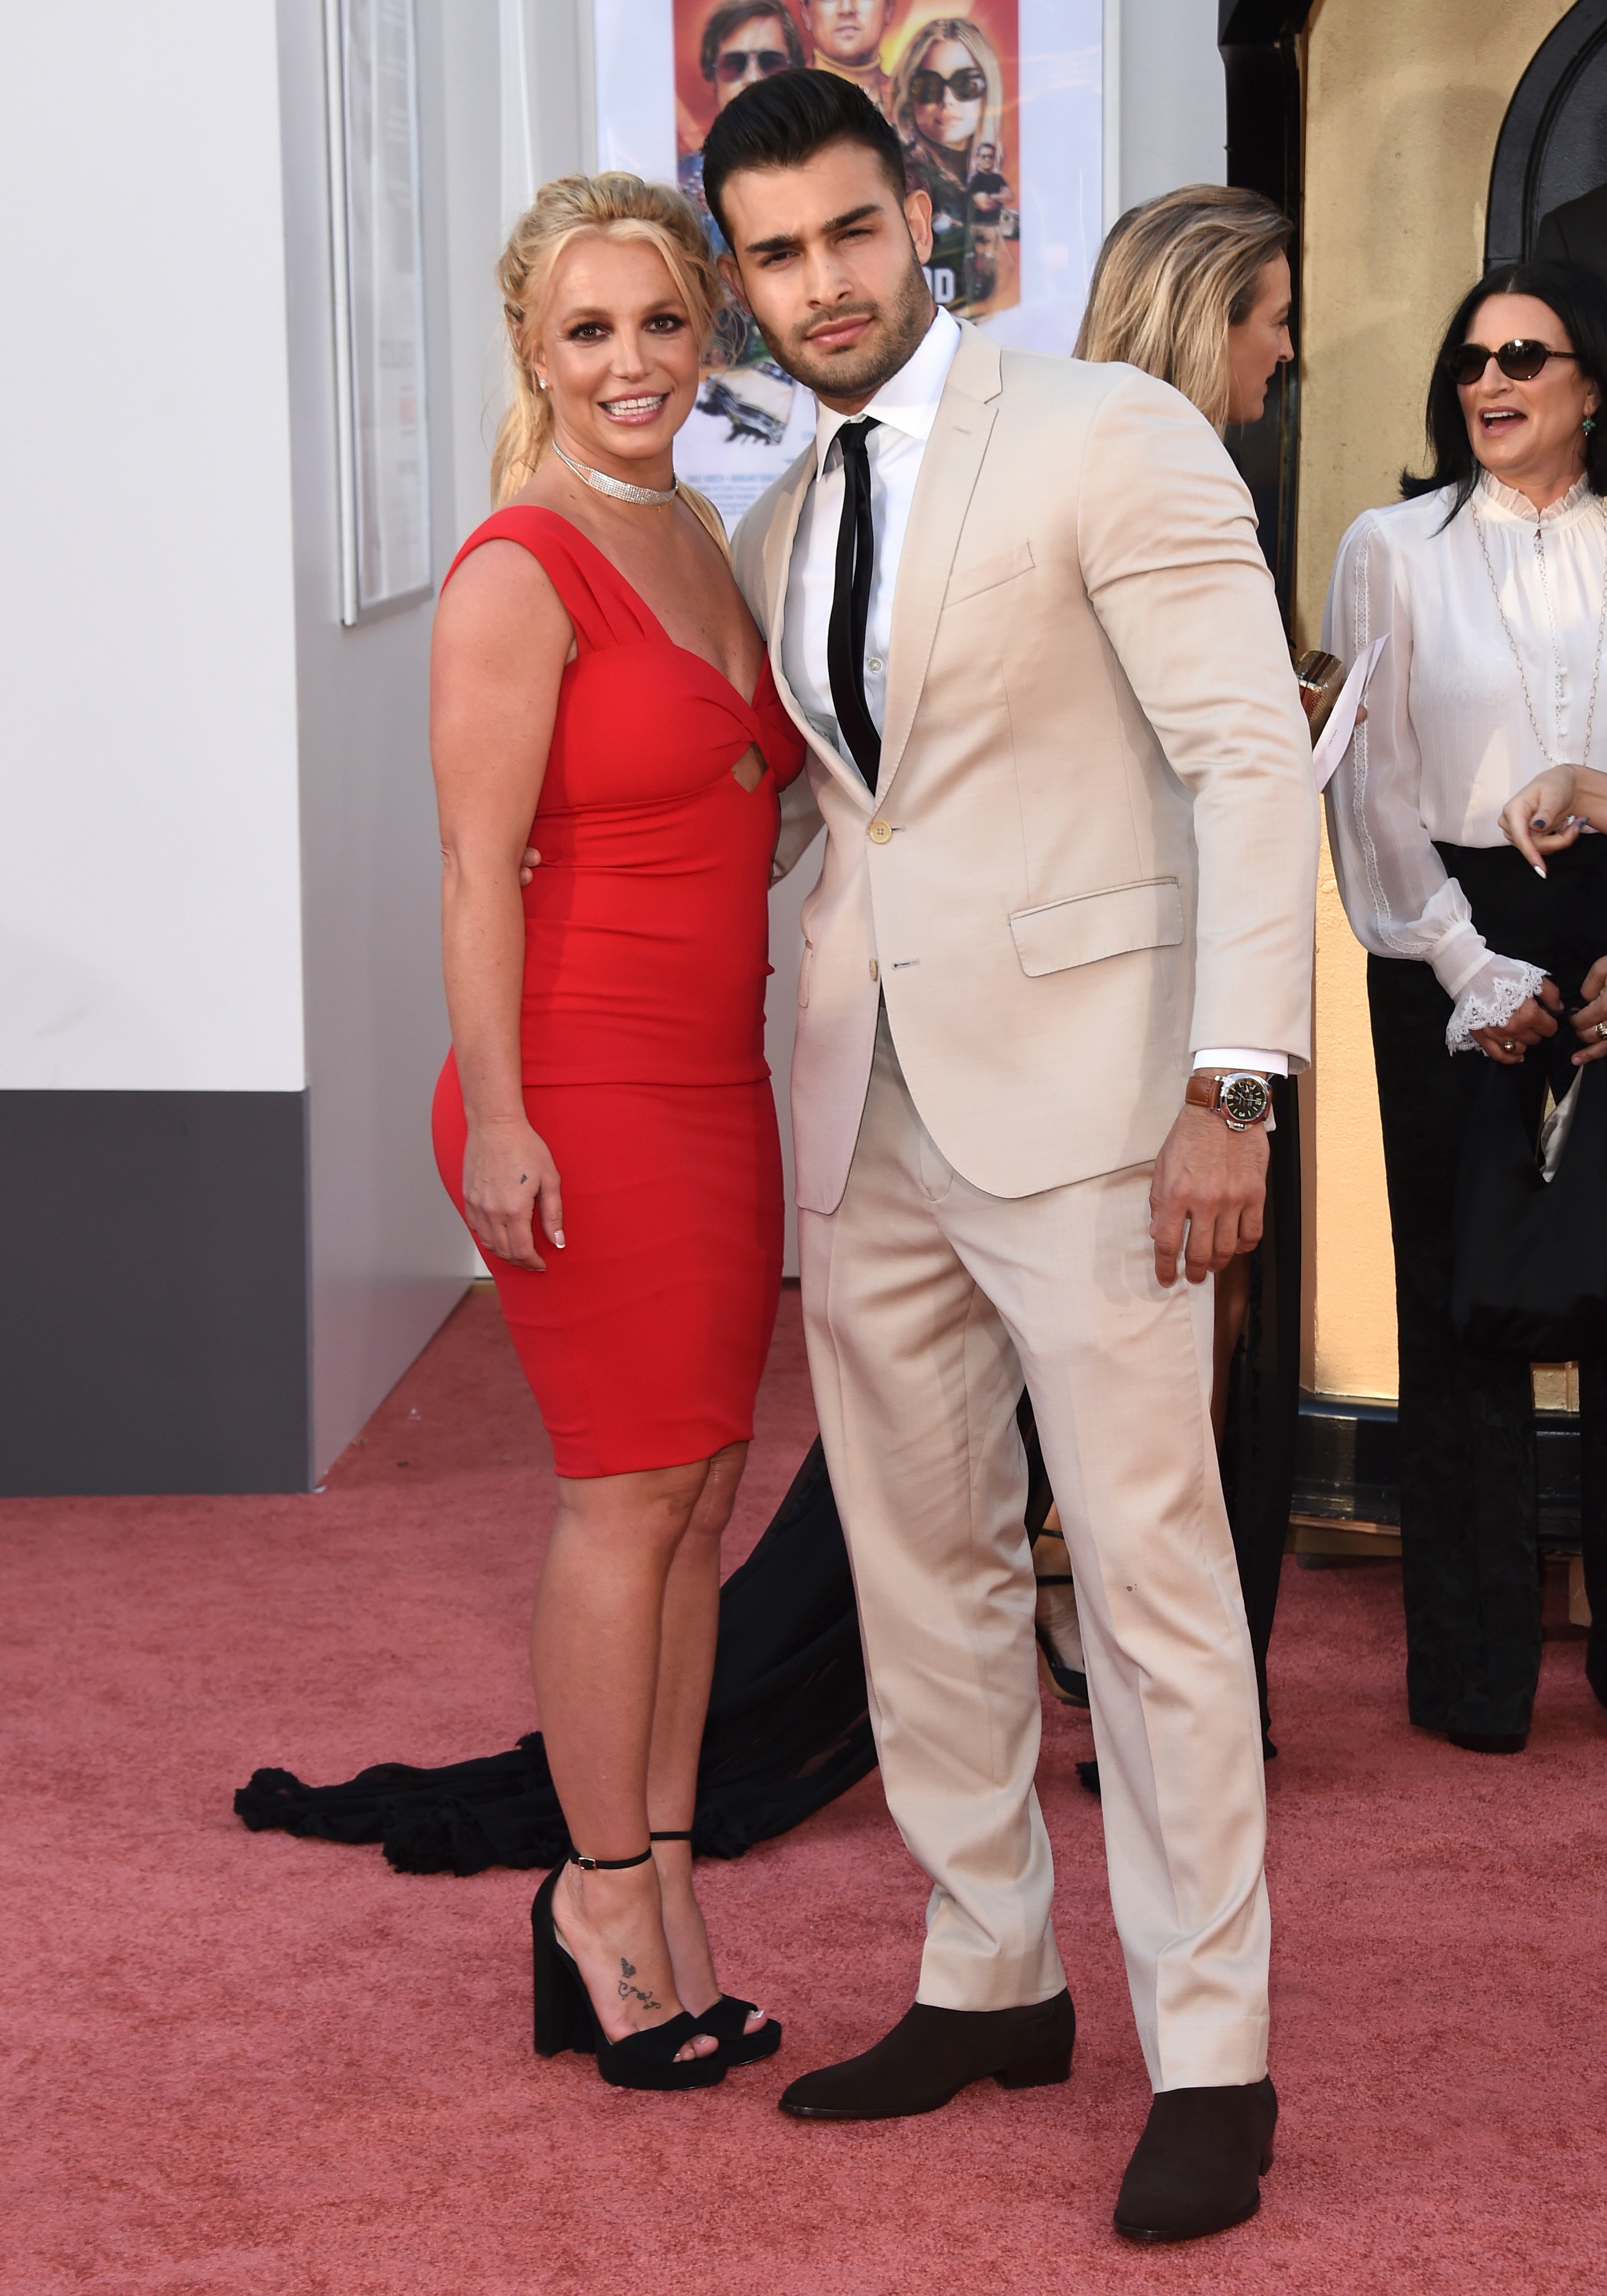 Britney Spears and Sam Asghari arrive at the Los Angeles premiere of "Once Upon a Time in Hollywood," at the TCL Chinese Theatre, Monday, July 22, 2019. Spears announced on Instagram on Sunday, Sept. 12, 2021, that she and Asghari are engaged. The couple met on the set of her “Slumber Party” music video in 2016.  (Photo by Jordan Strauss/Invision/AP, File)